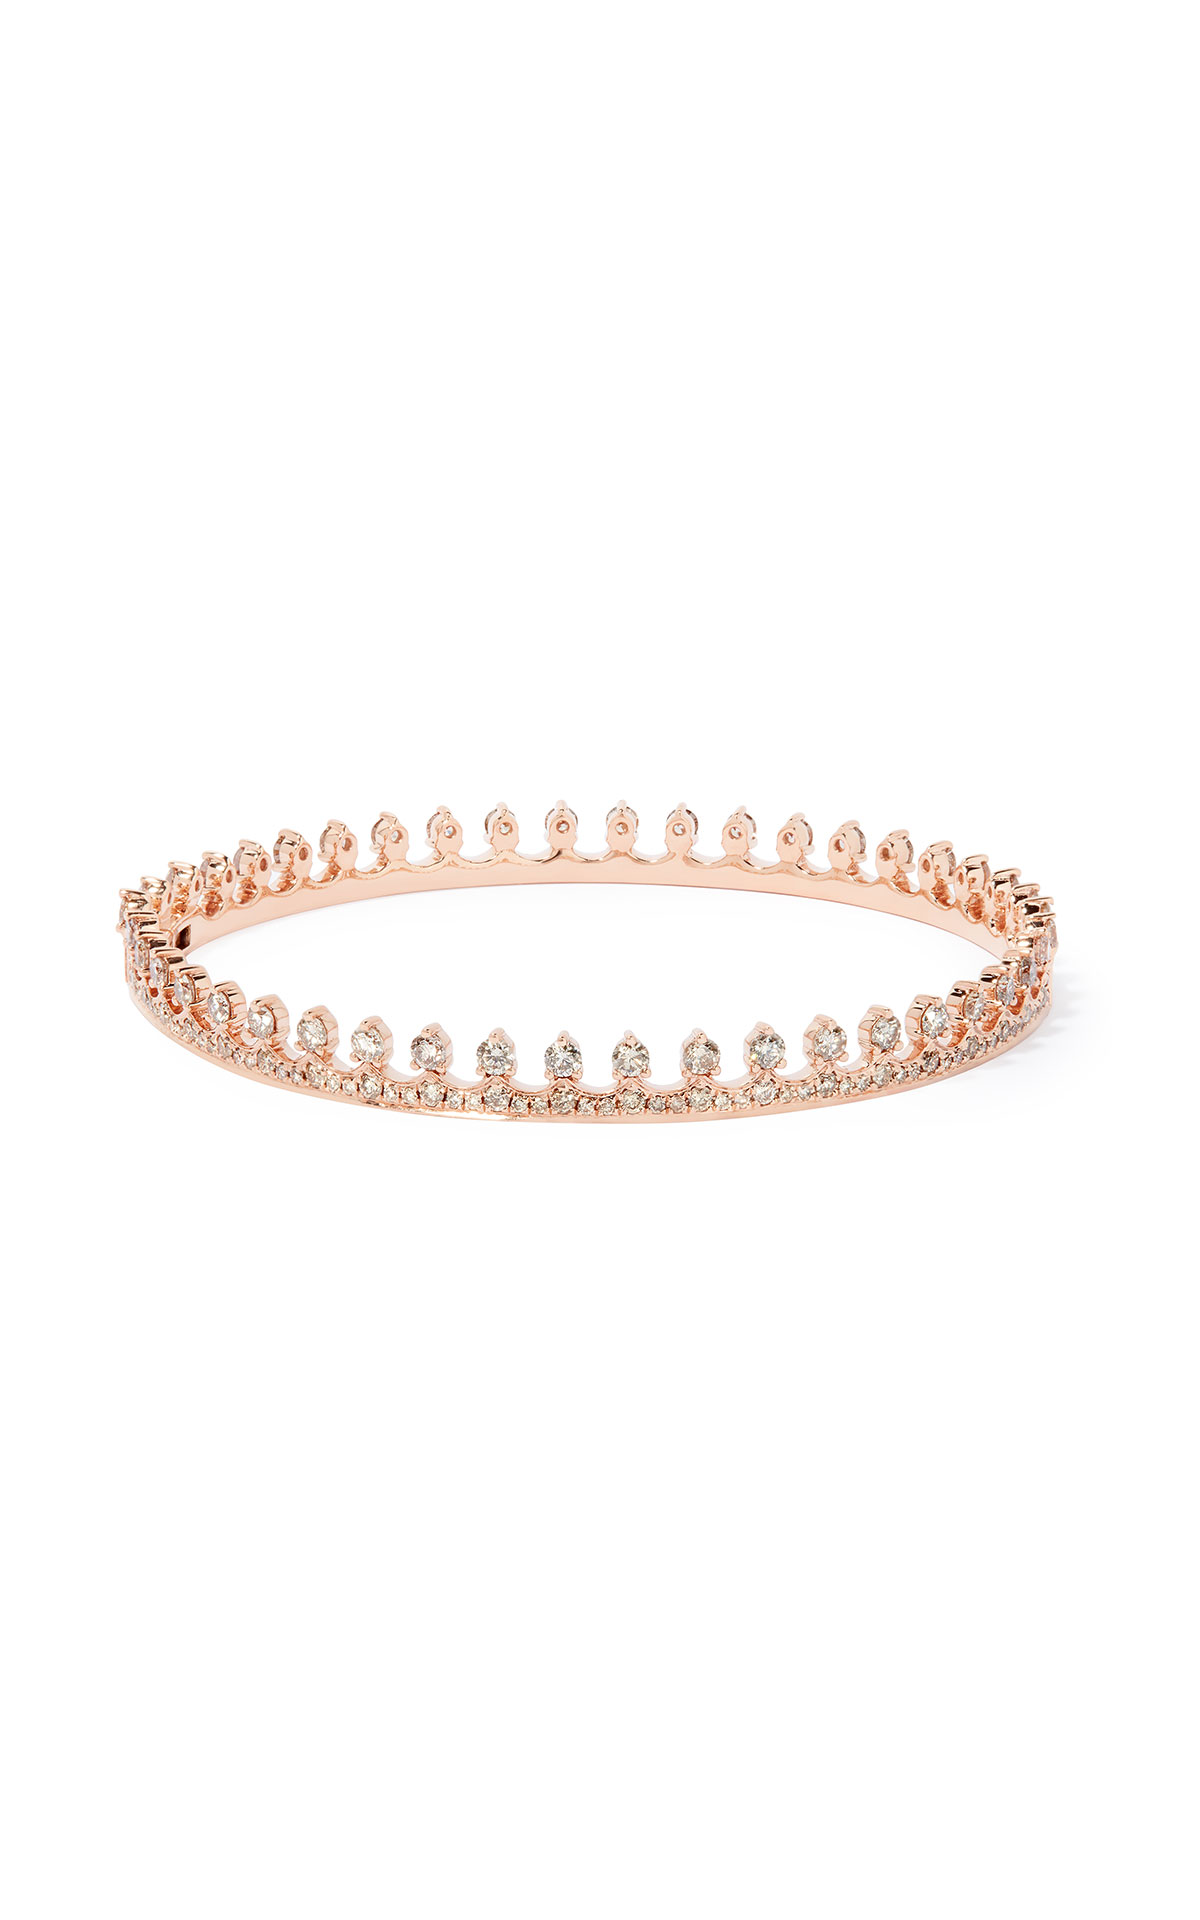 Annoushka 18ct rose gold and diamond crown bangle from Bicester Village